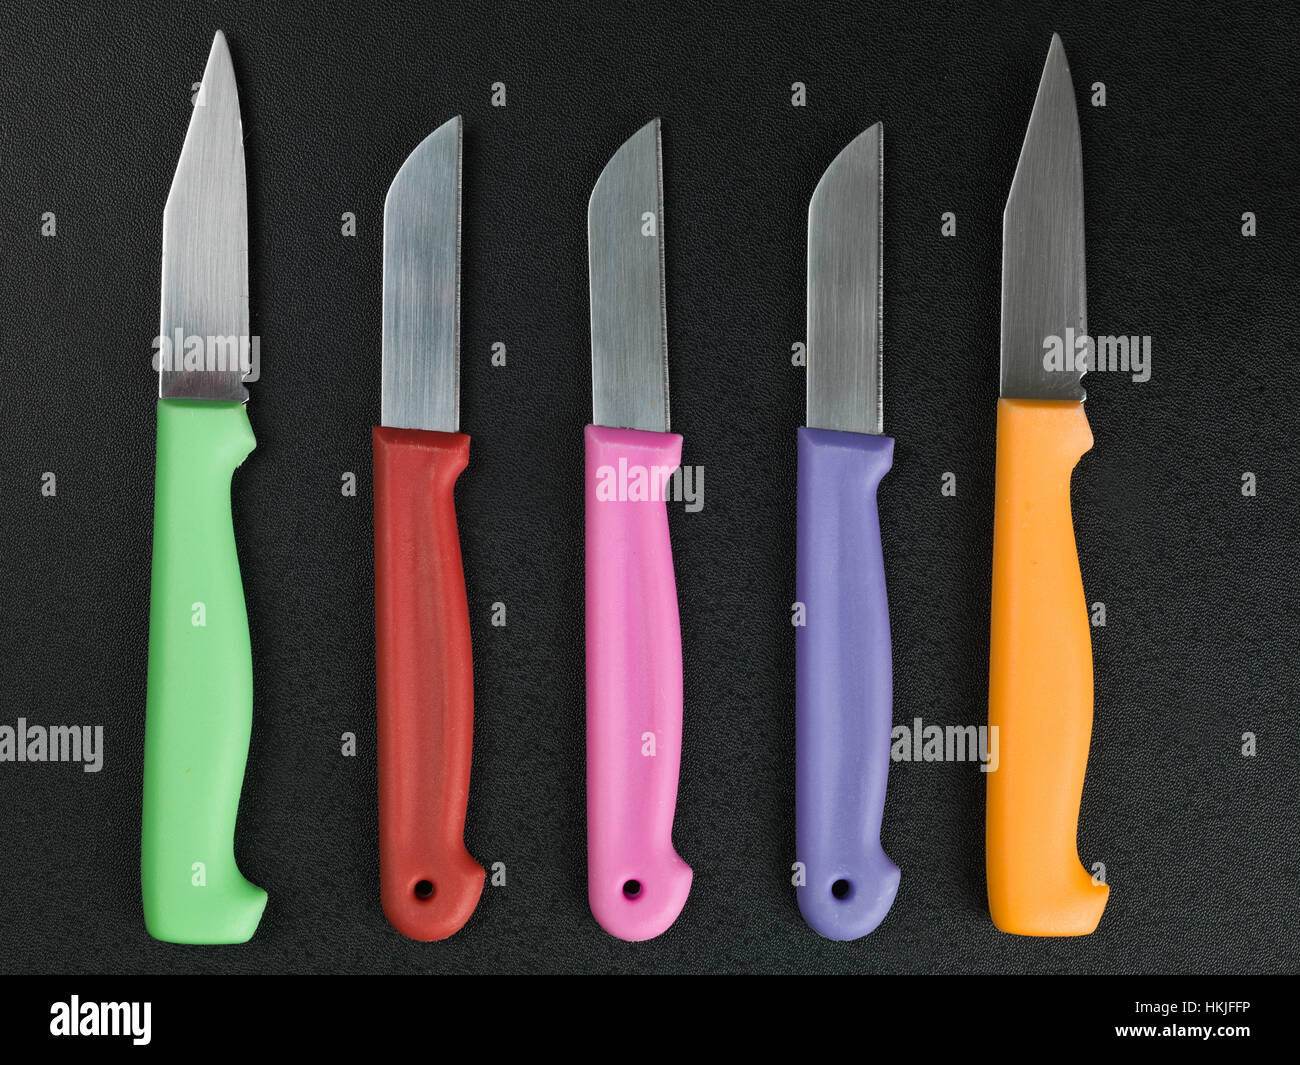 Set of Colorful Kitchen Knives Against a Black Background Stock Photo